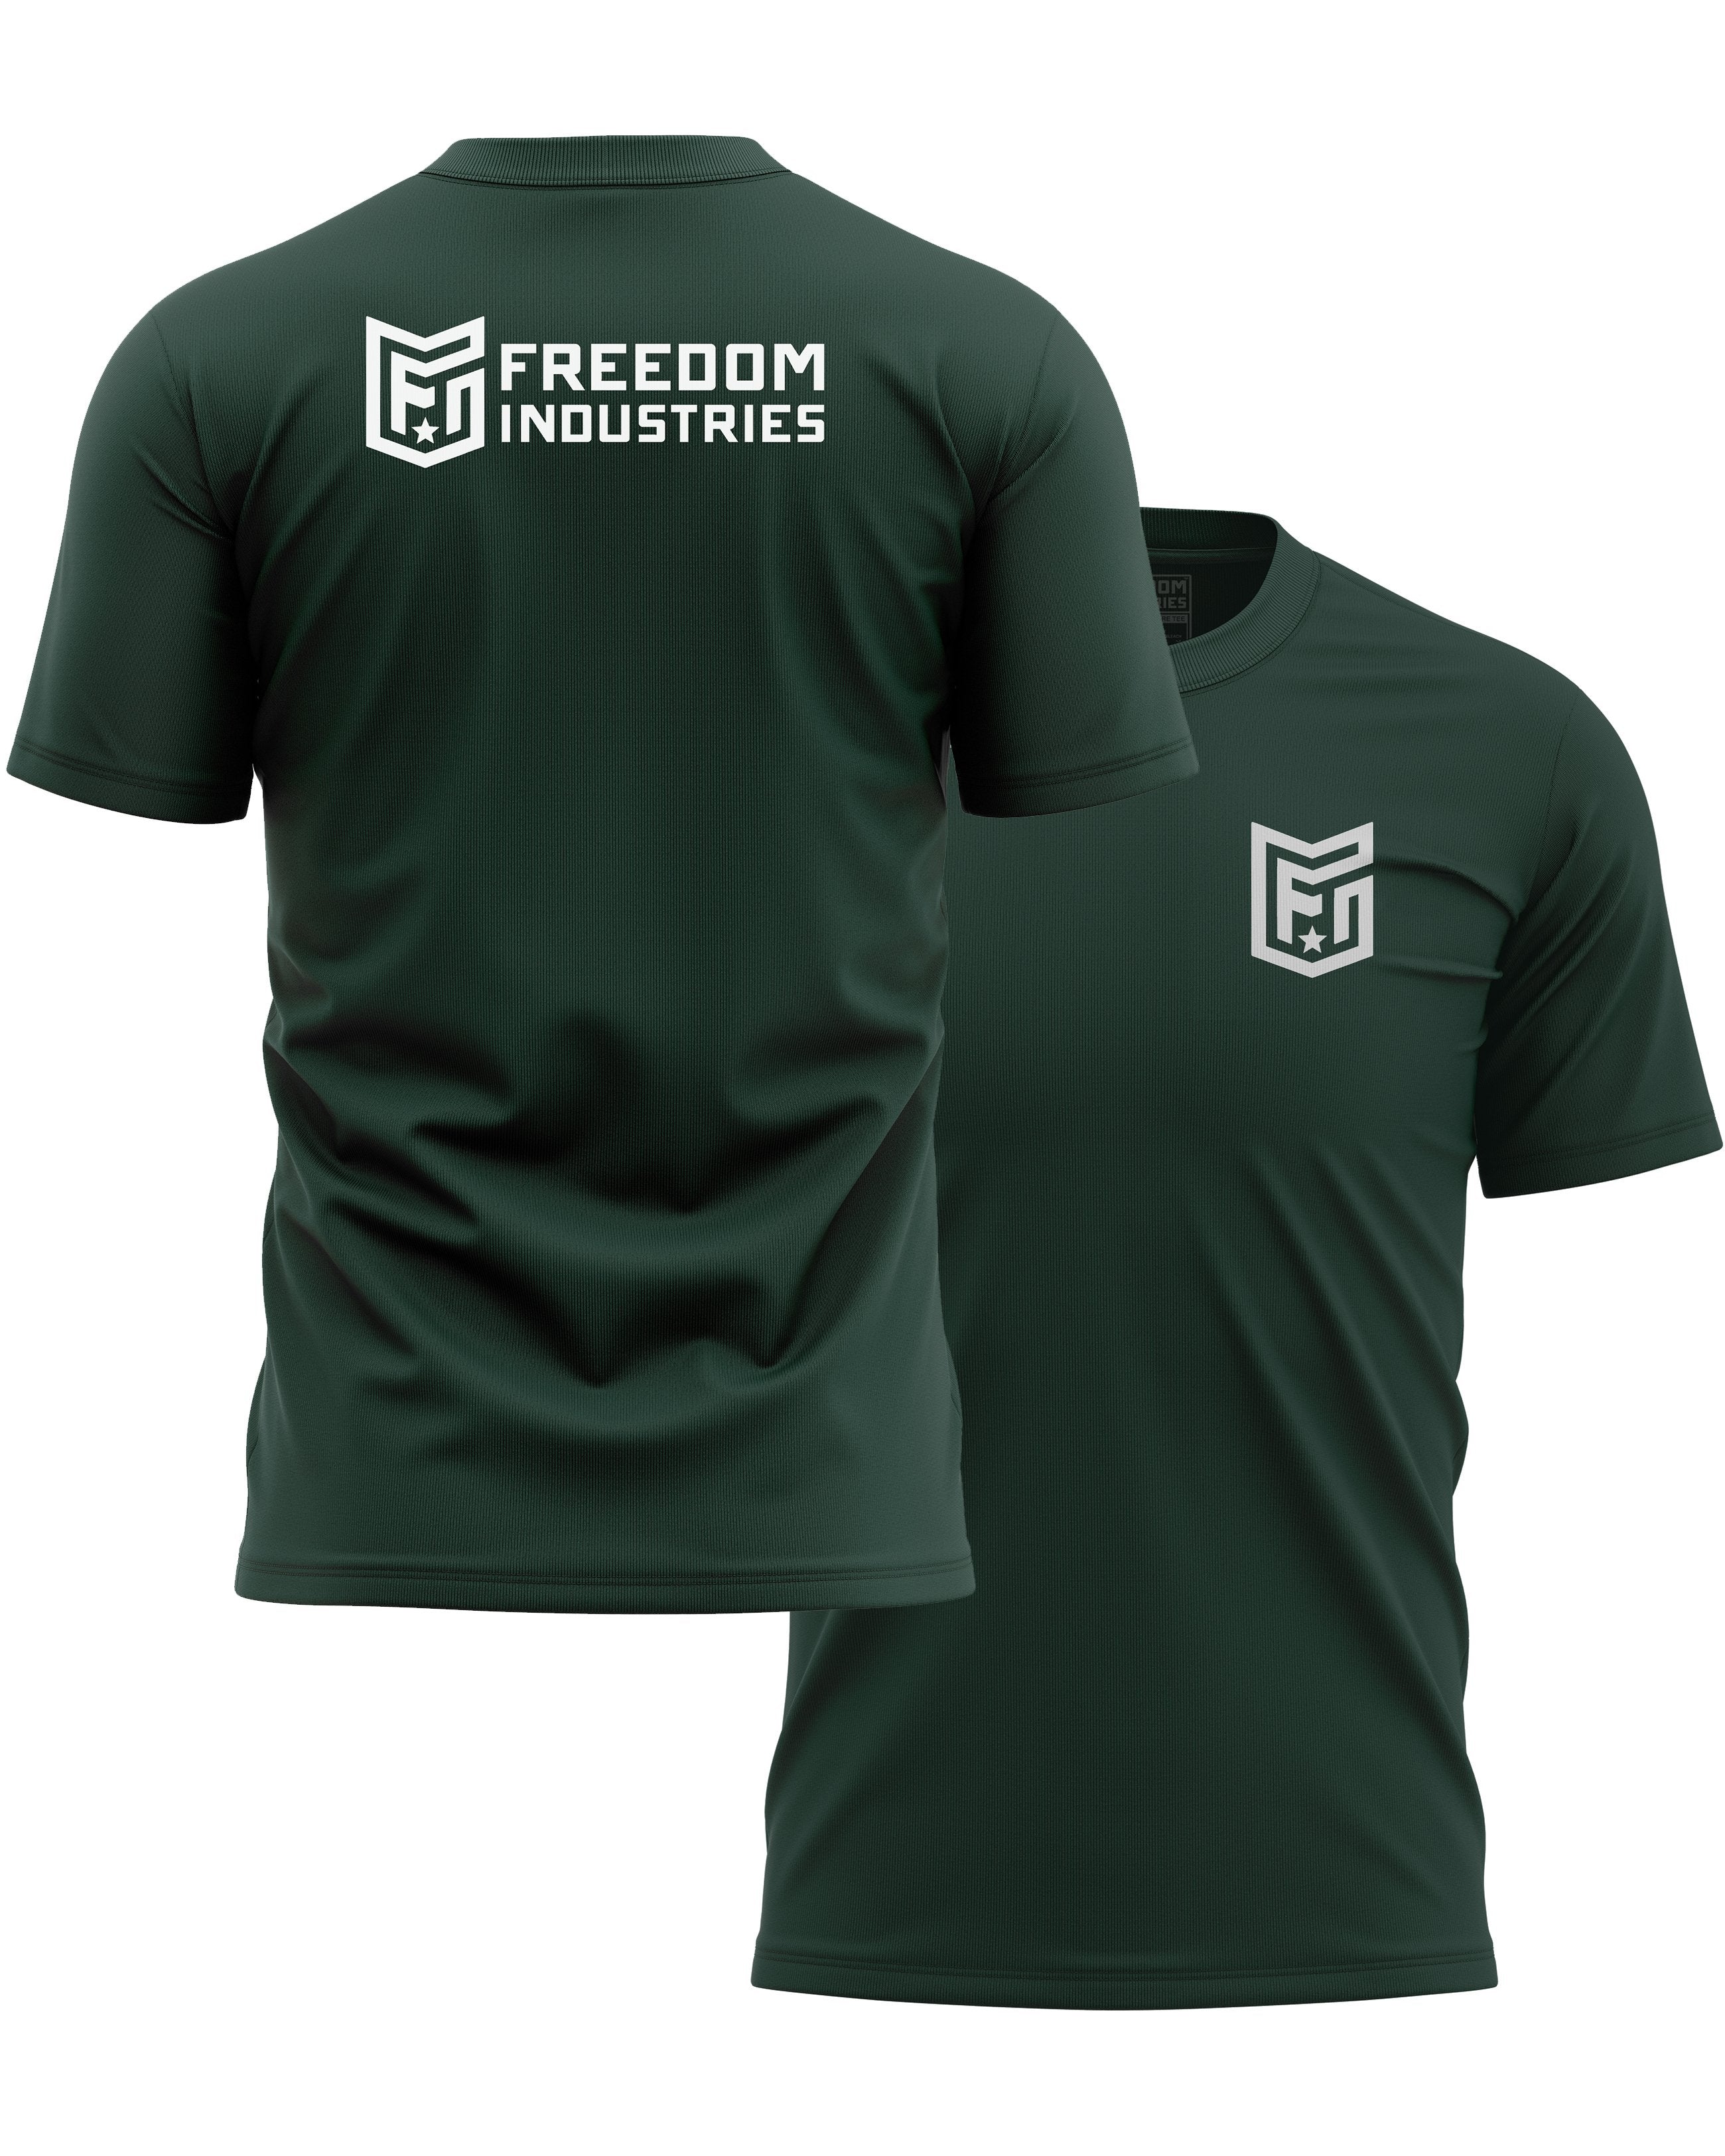 LOGO CORE TEE - FOREST - FREEDOM INDUSTRIES (4606339350600) (4606376902728)